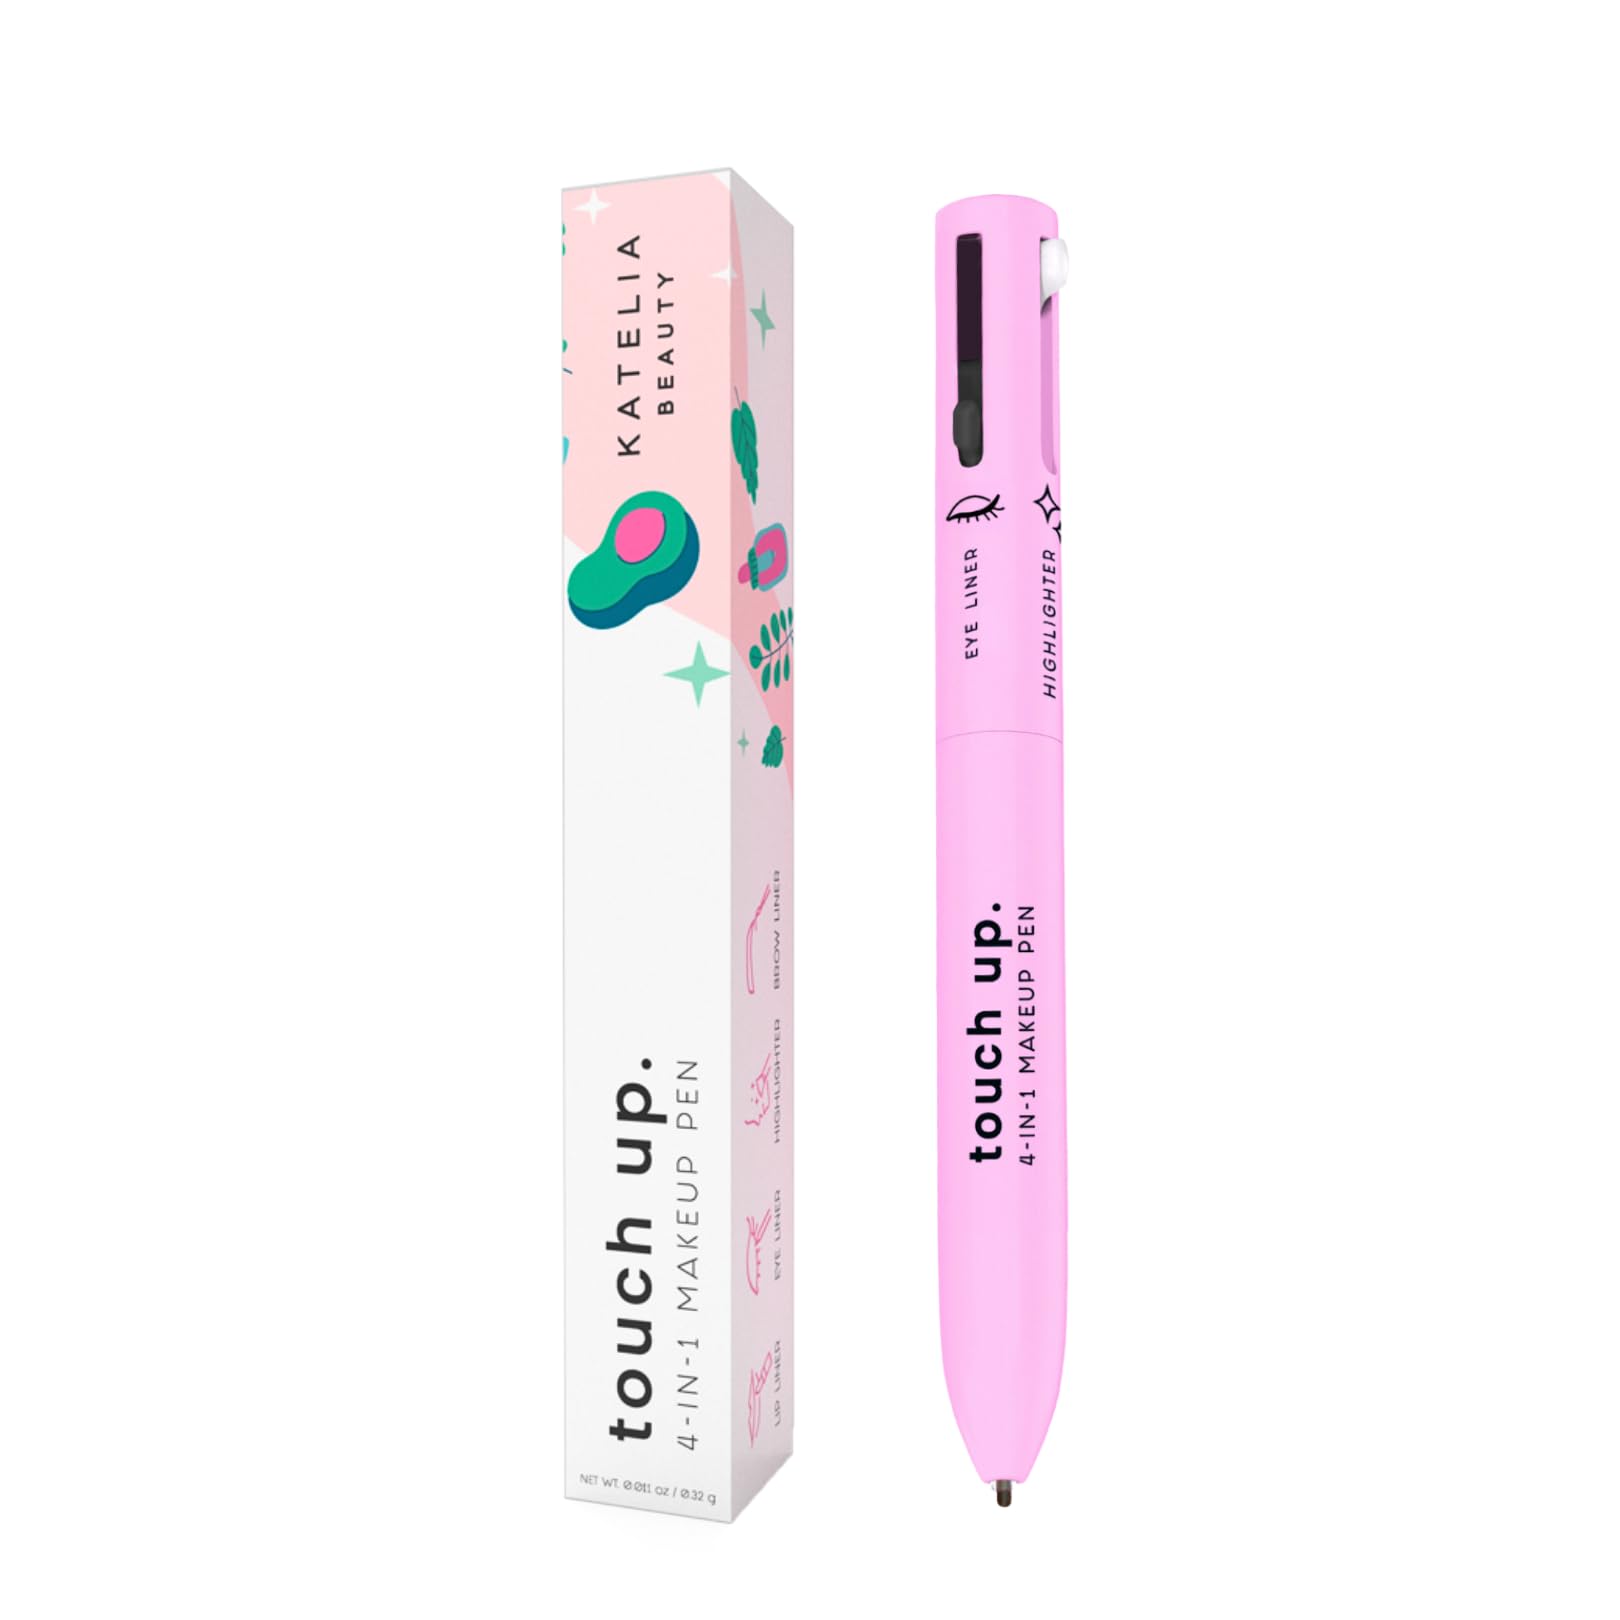 Katelia Beauty Touch Up 4-in-1 Makeup Pen (Eye Liner, Brow Liner, Lip Liner, & Highlighter) All-in-One, Multi-Functional Portable Beauty Product, On The Go Travel Makeup Pencil, Refillable Magic Pen (Makeup Pen A)